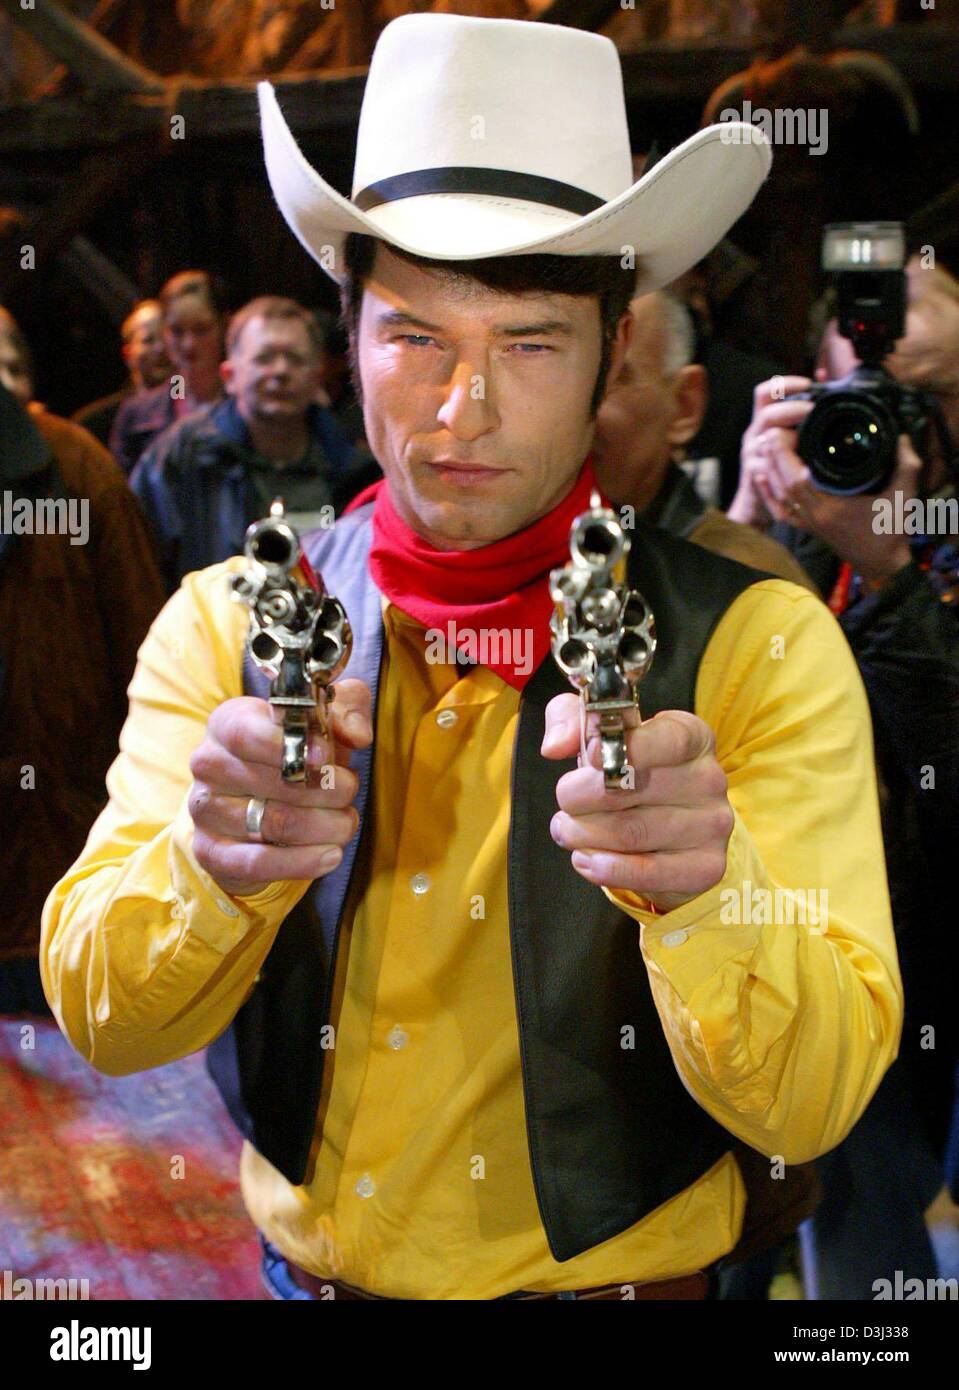 (dpa) - German actor Til Schweiger poses with his six shooters in the role of Lucky Luke during the filming of the film 'The Daltons vs Lucky Luke' in Cologne, Germany, 3 February 2004. Filming started on 26 January on location in Spain and at the MMC production studios in Cologne. Stock Photo